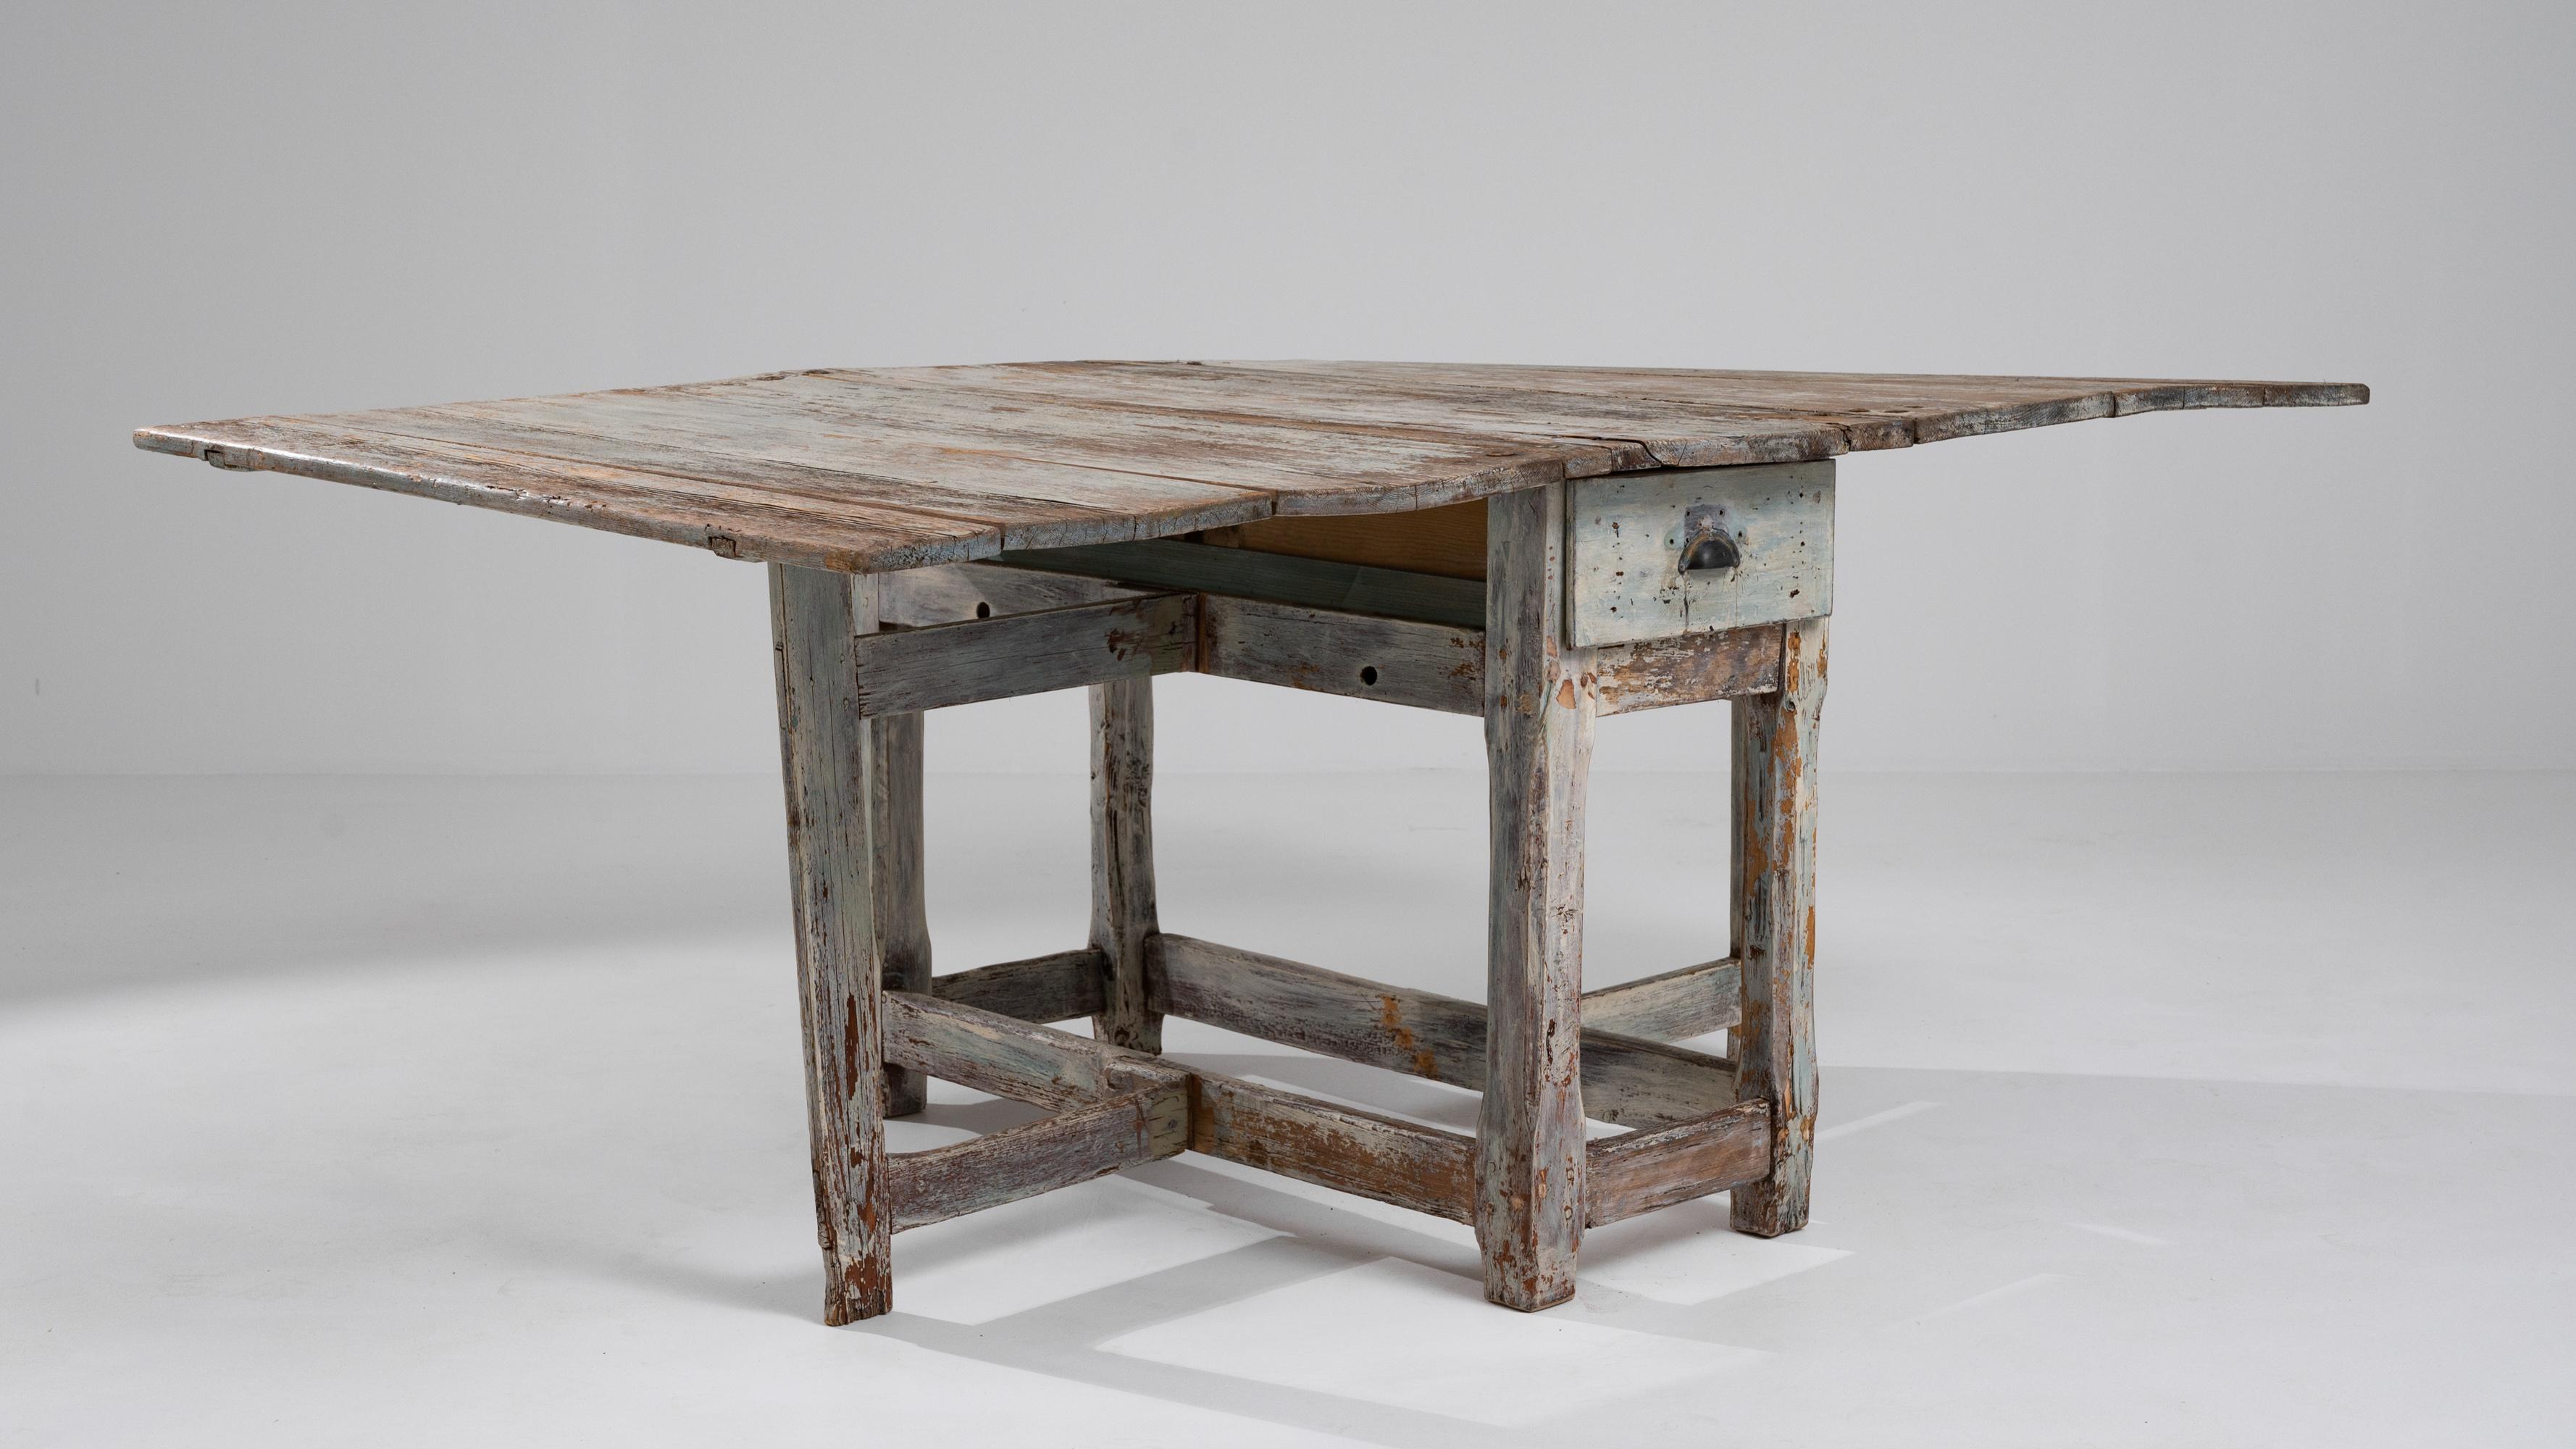 Patinated 19th Century Scandinavian Wooden Gate Leg Table For Sale